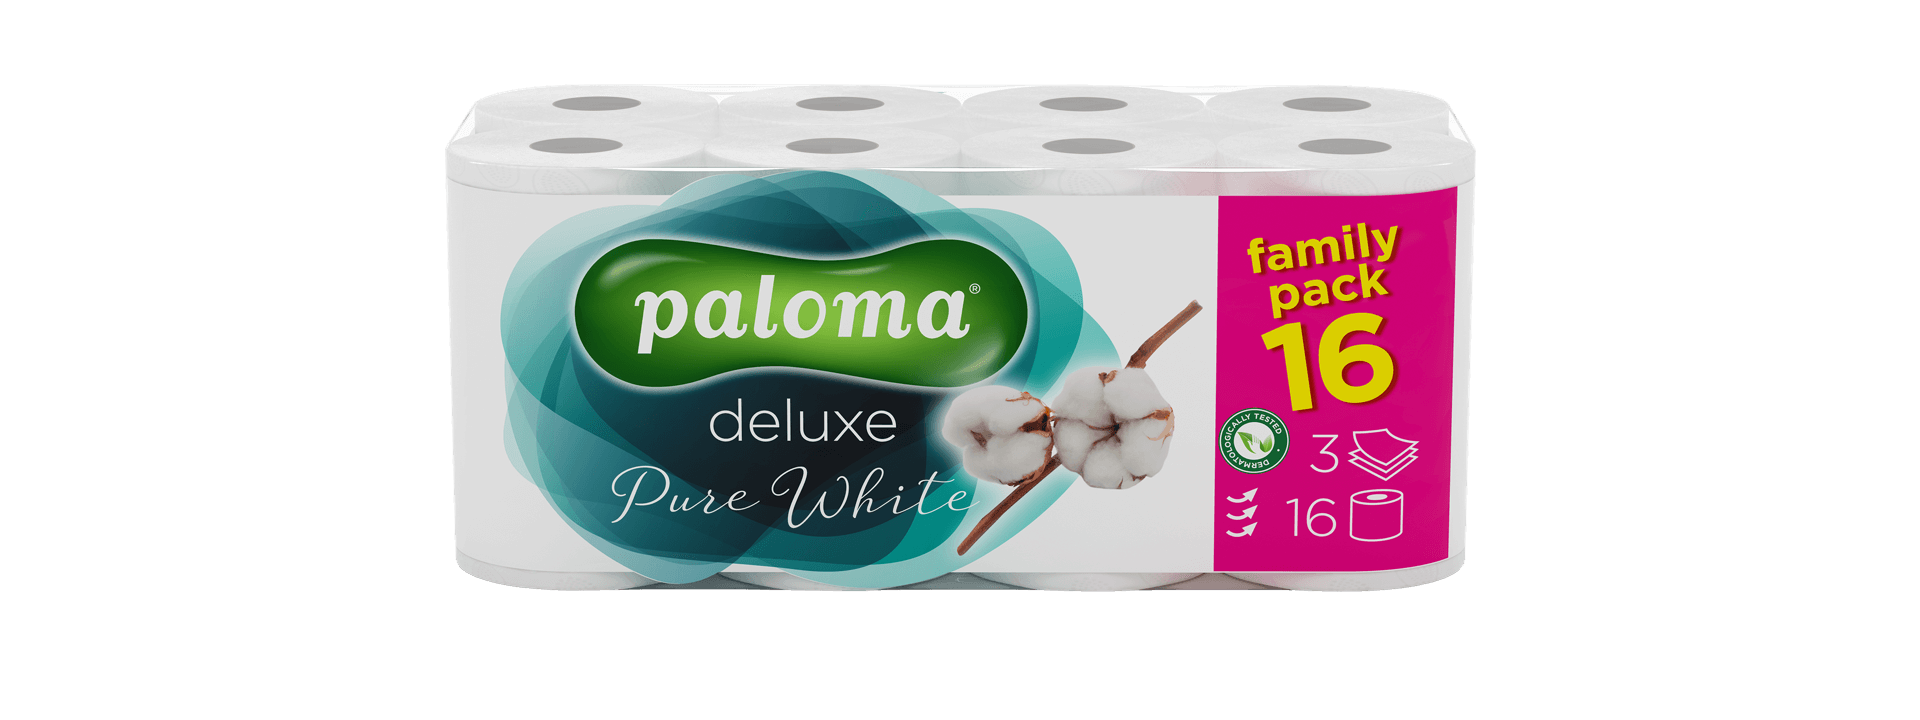 paloma-deluxe-deluxe-pure-white-16